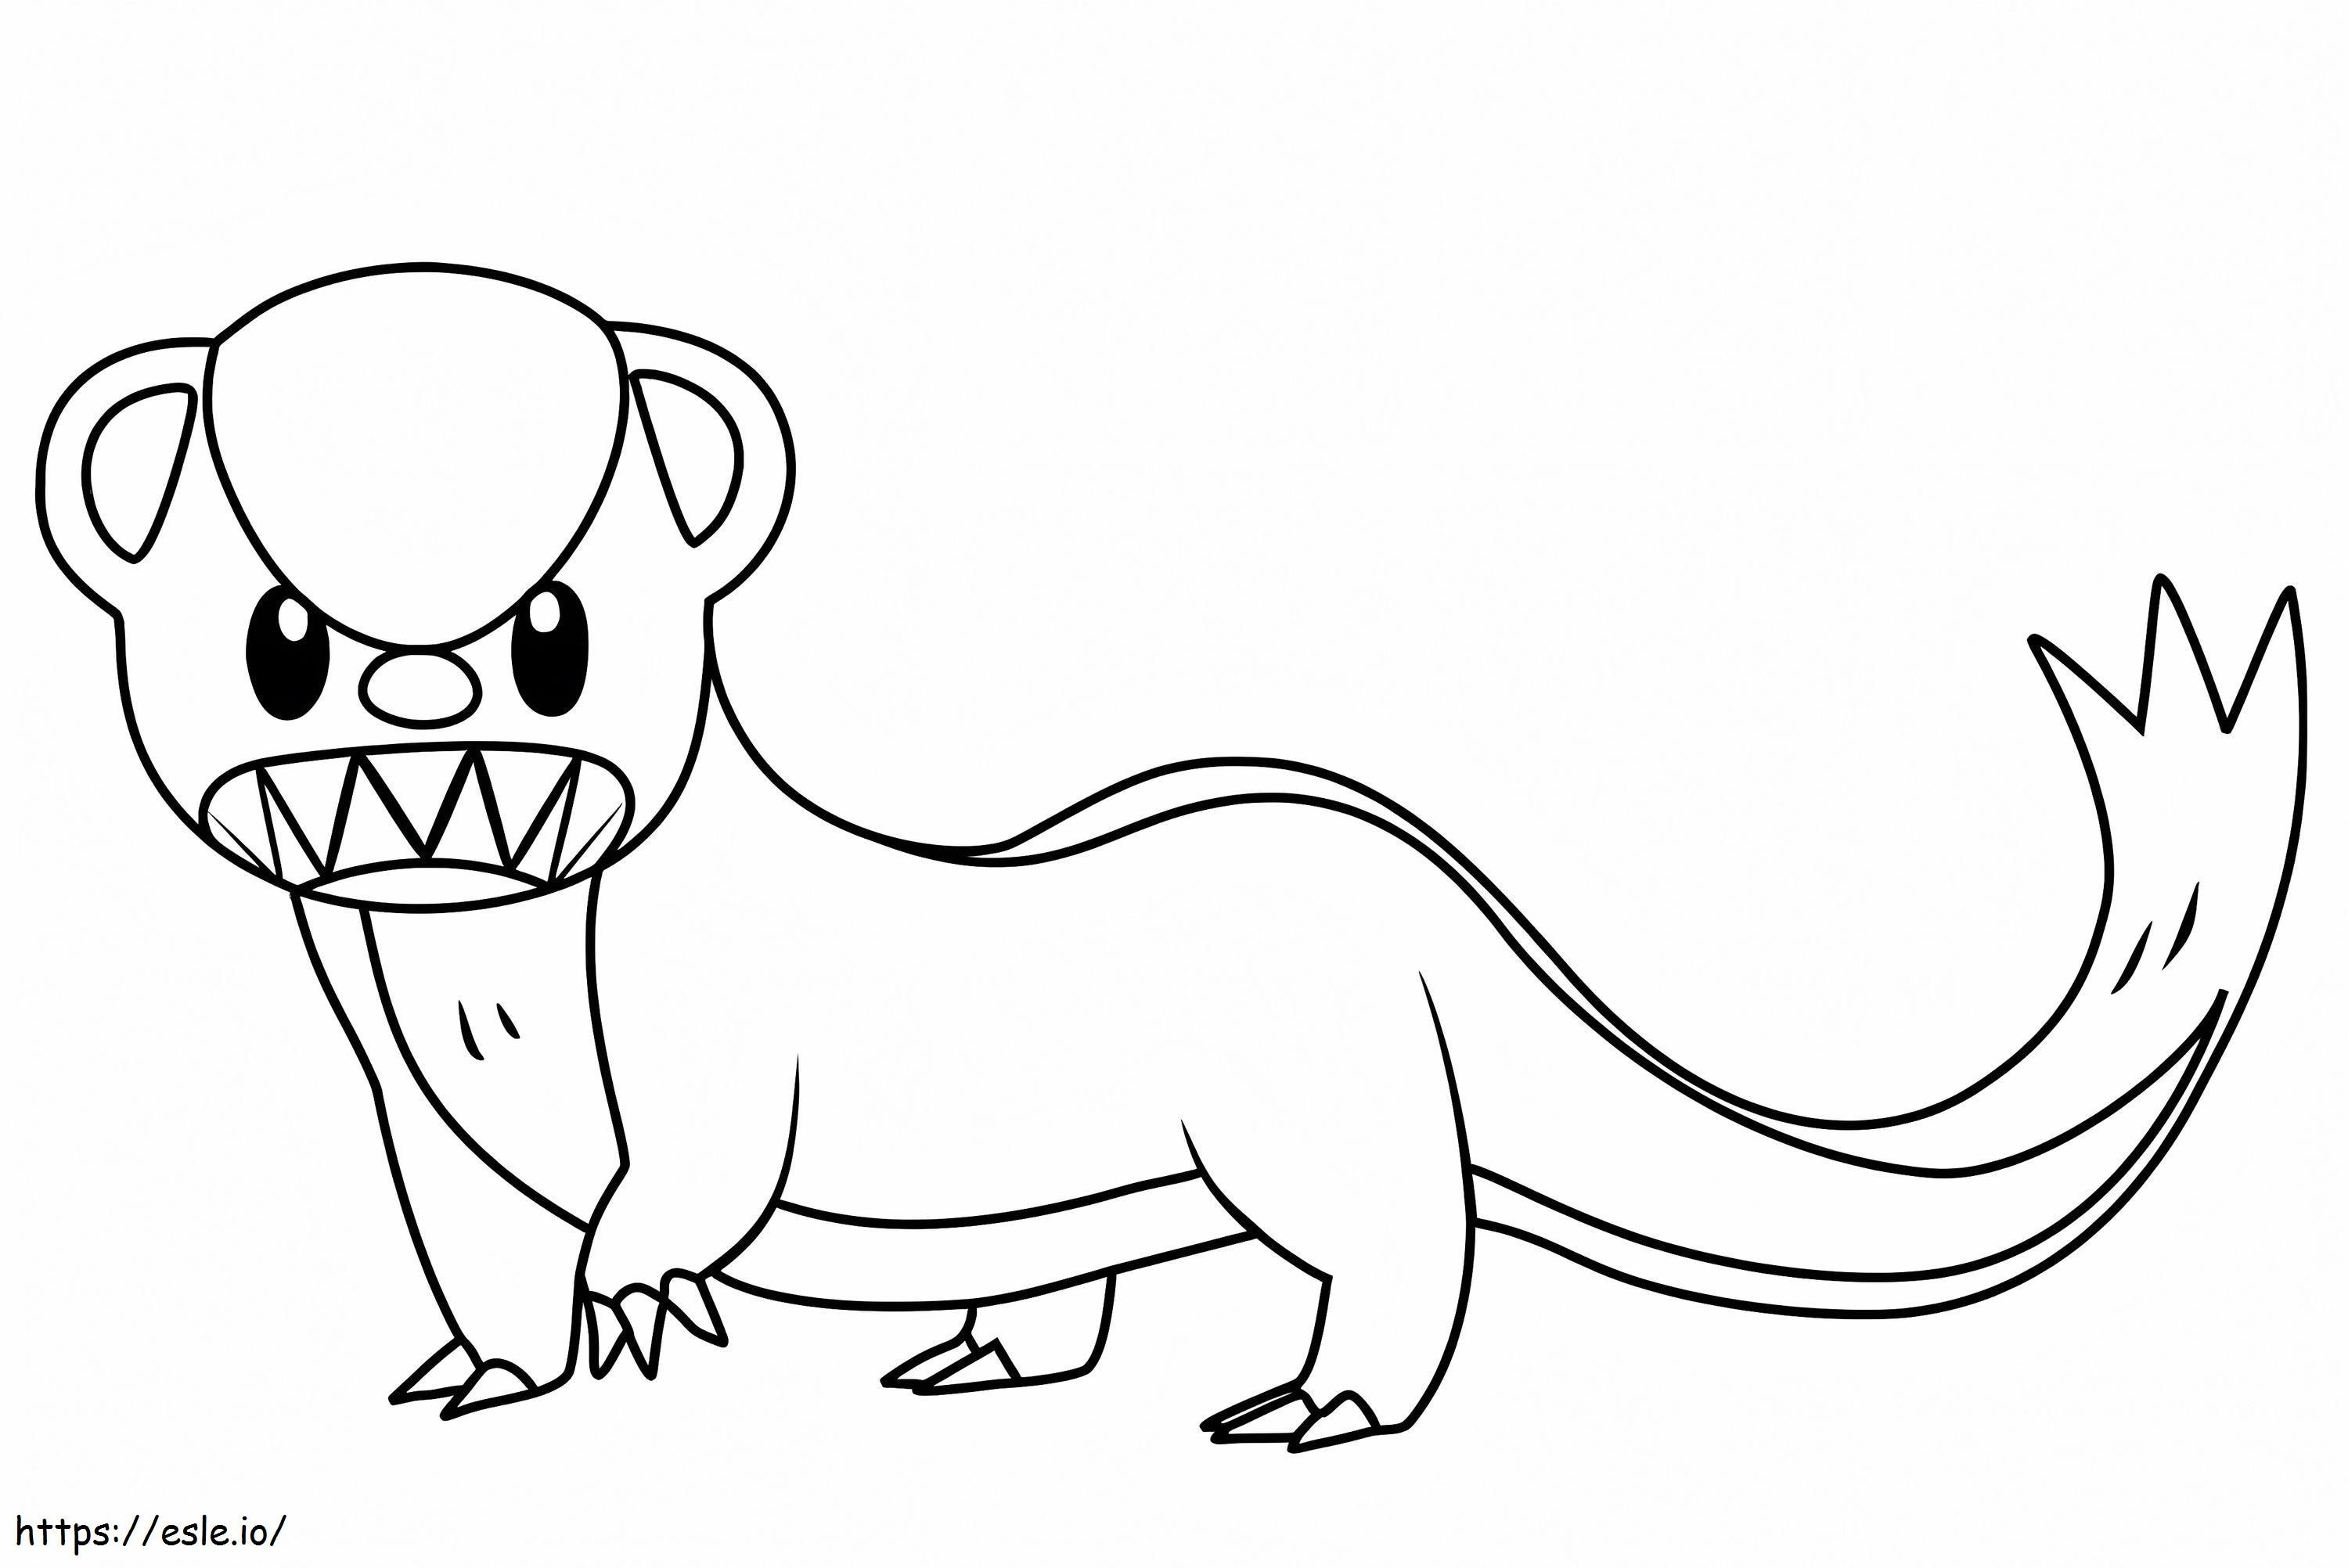 Yungoos Pokemon coloring page